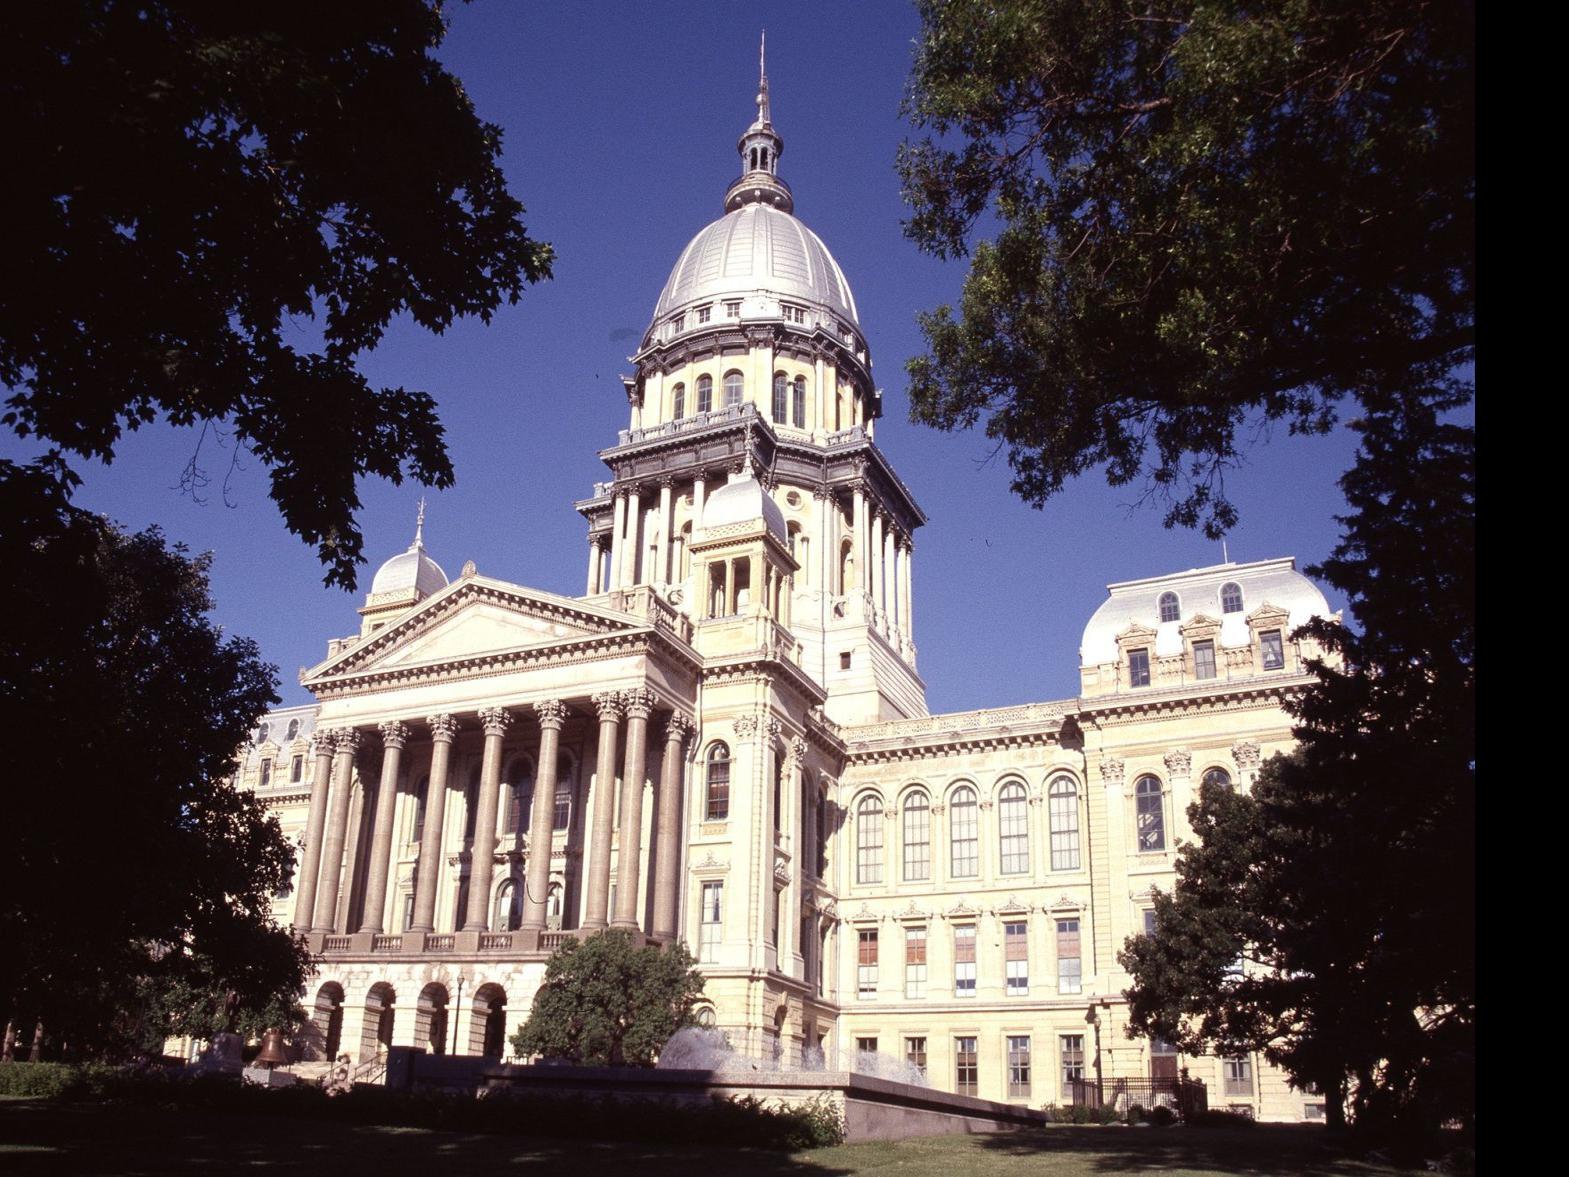 15 new illinois laws for 2020 local herald review com 15 new illinois laws for 2020 local